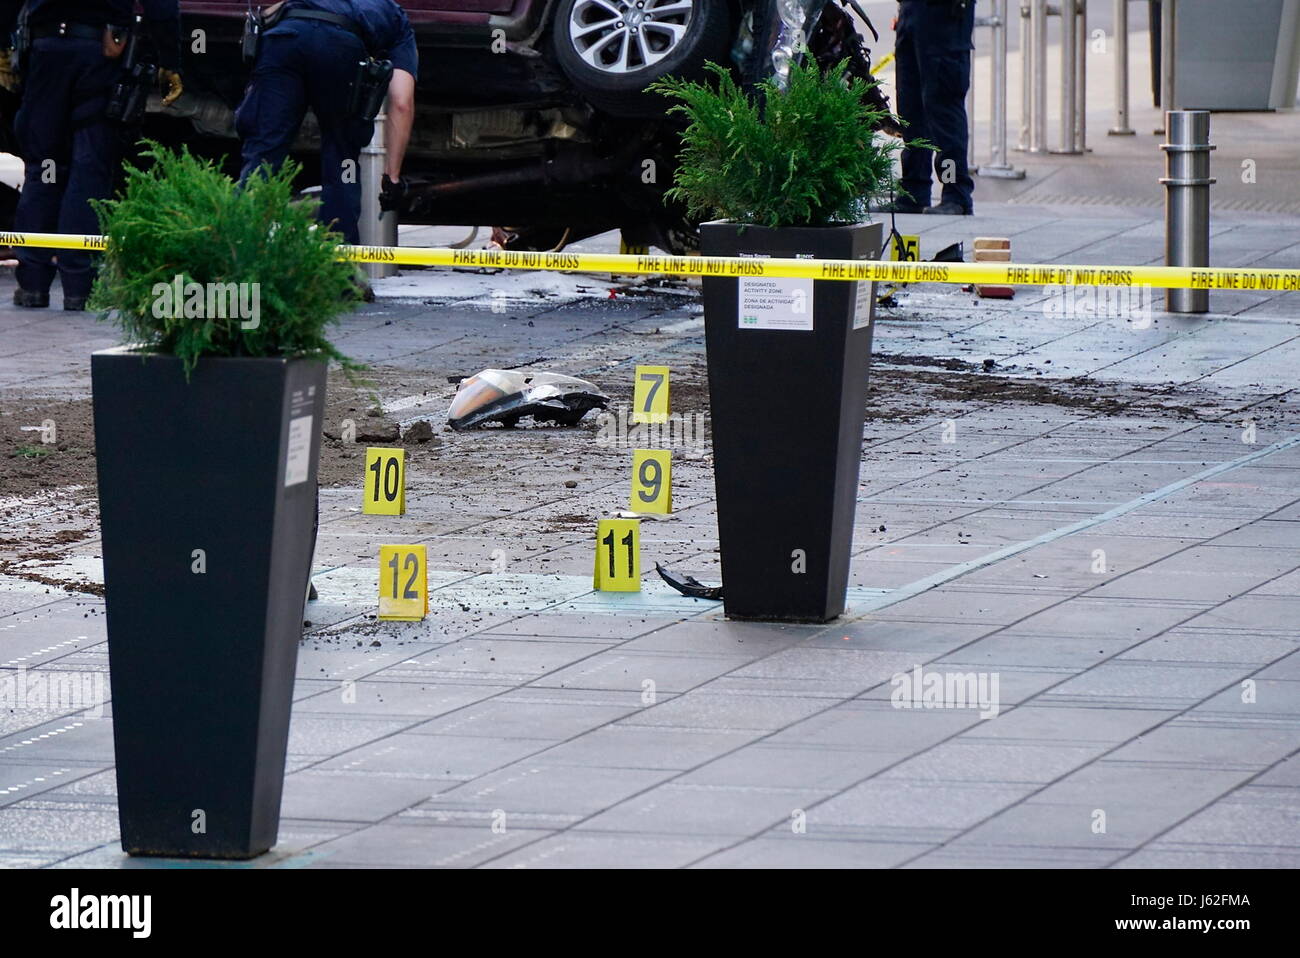 New York, New York, USA. 18th May, 2017. Crime scene markers near the damaged vehicle as Police officers investigate the scene of a car crash in Times Square that took the life of an 18 year-old Michigan girl and injured 22 others Credit: Kevin C. Downs/ZUMA Wire/ZUMAPRESS.com/Alamy Live News Stock Photo